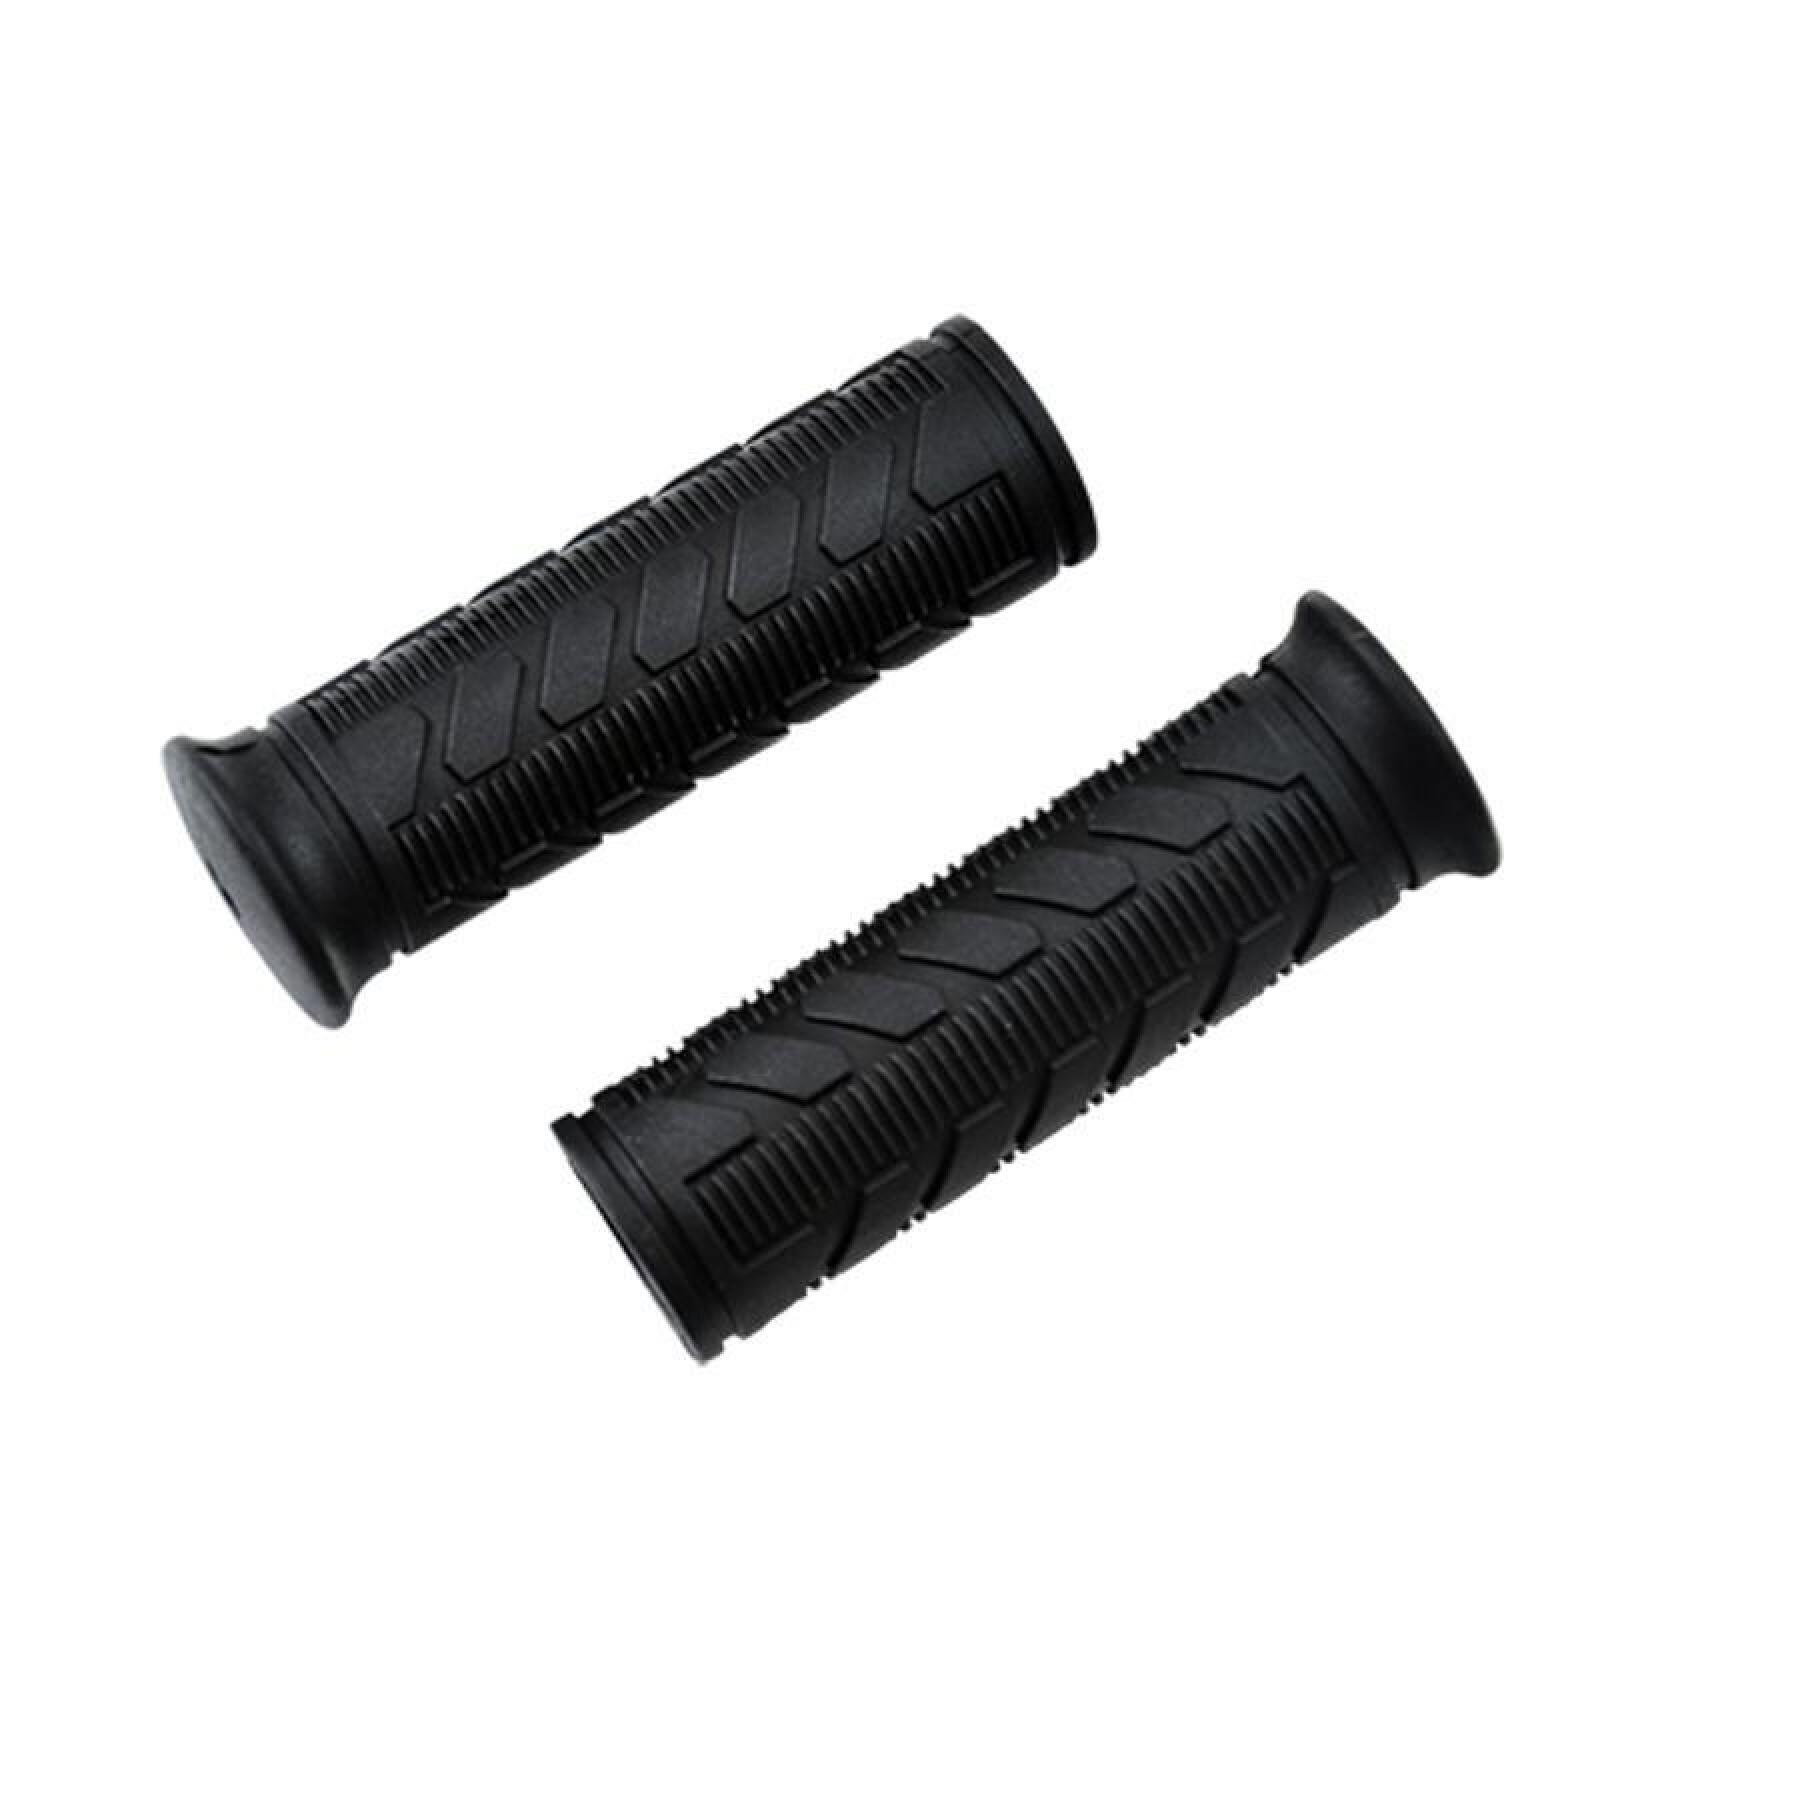 Pair of handles CGN Gripshift